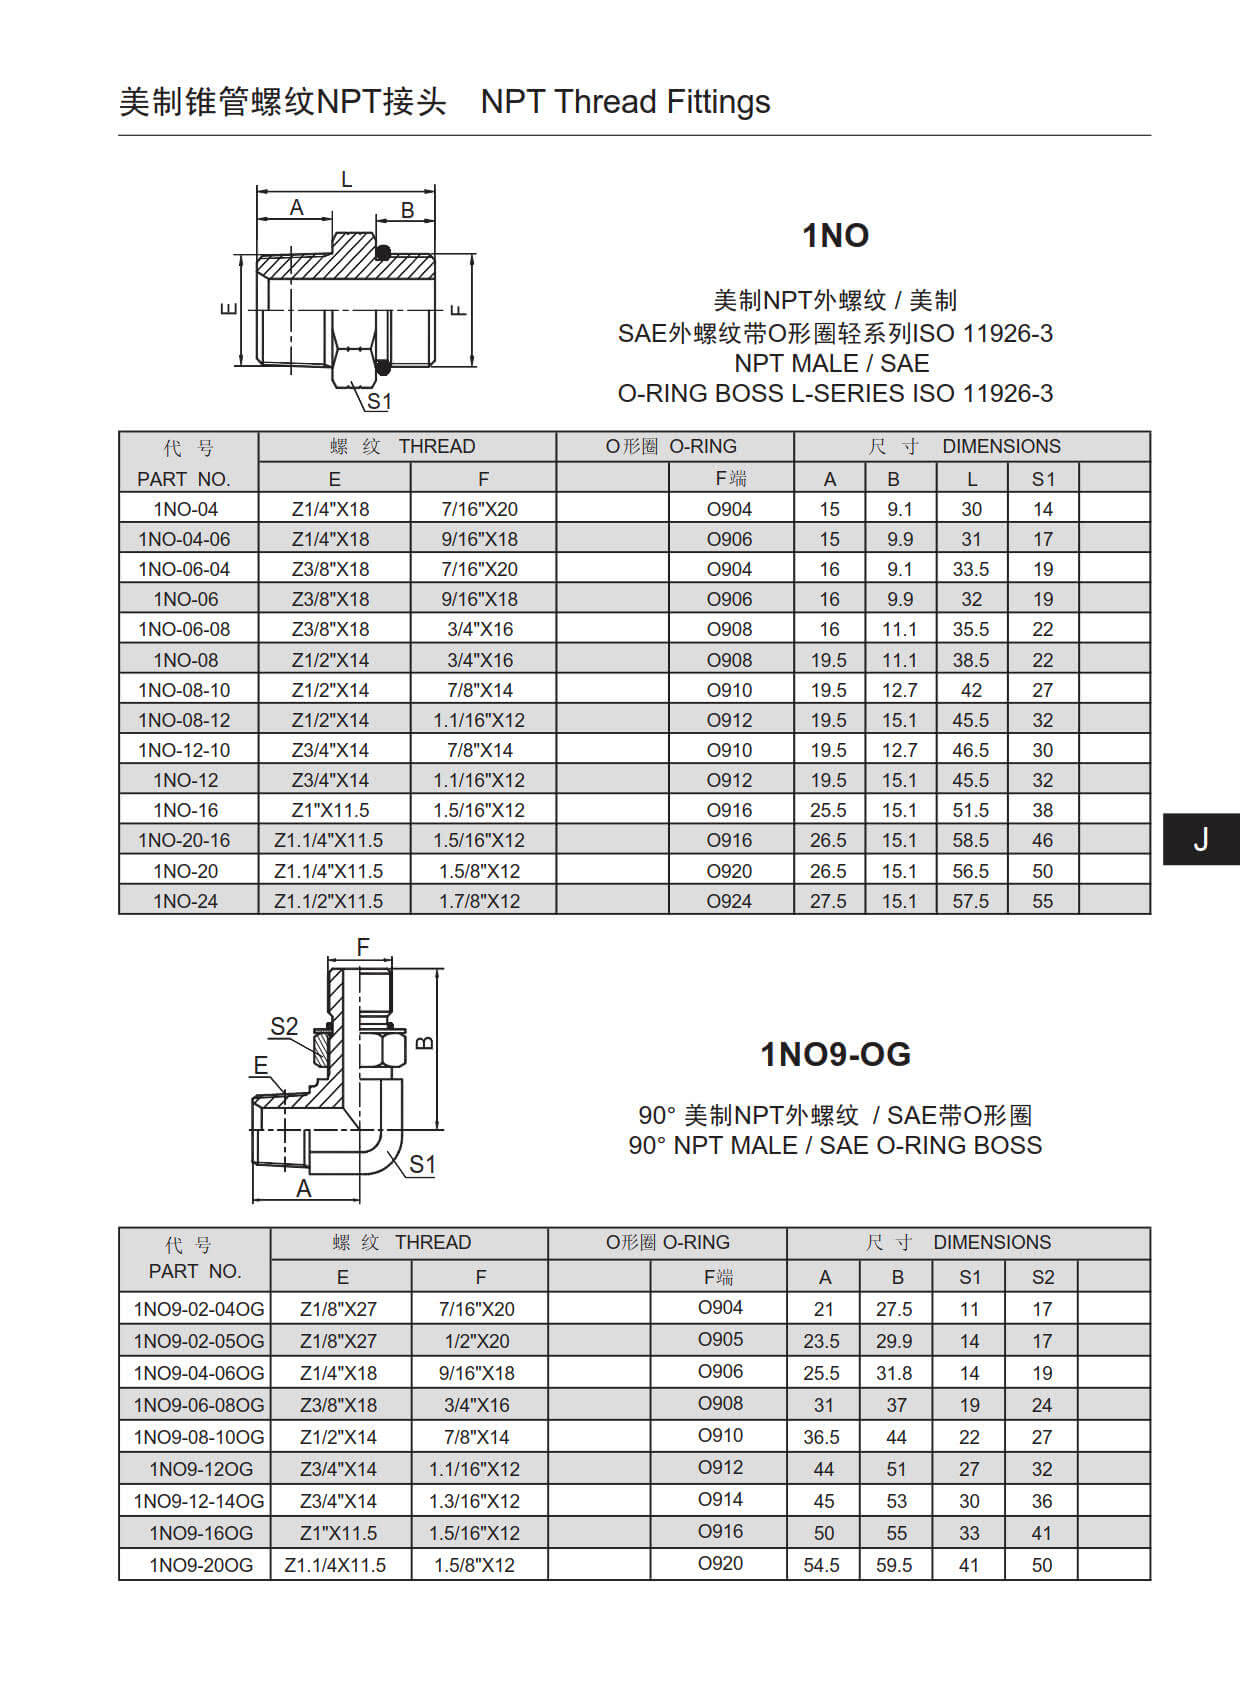 1NO NPT MALE /SAEO-RING BOSS L-SERIES ISO 11926-3